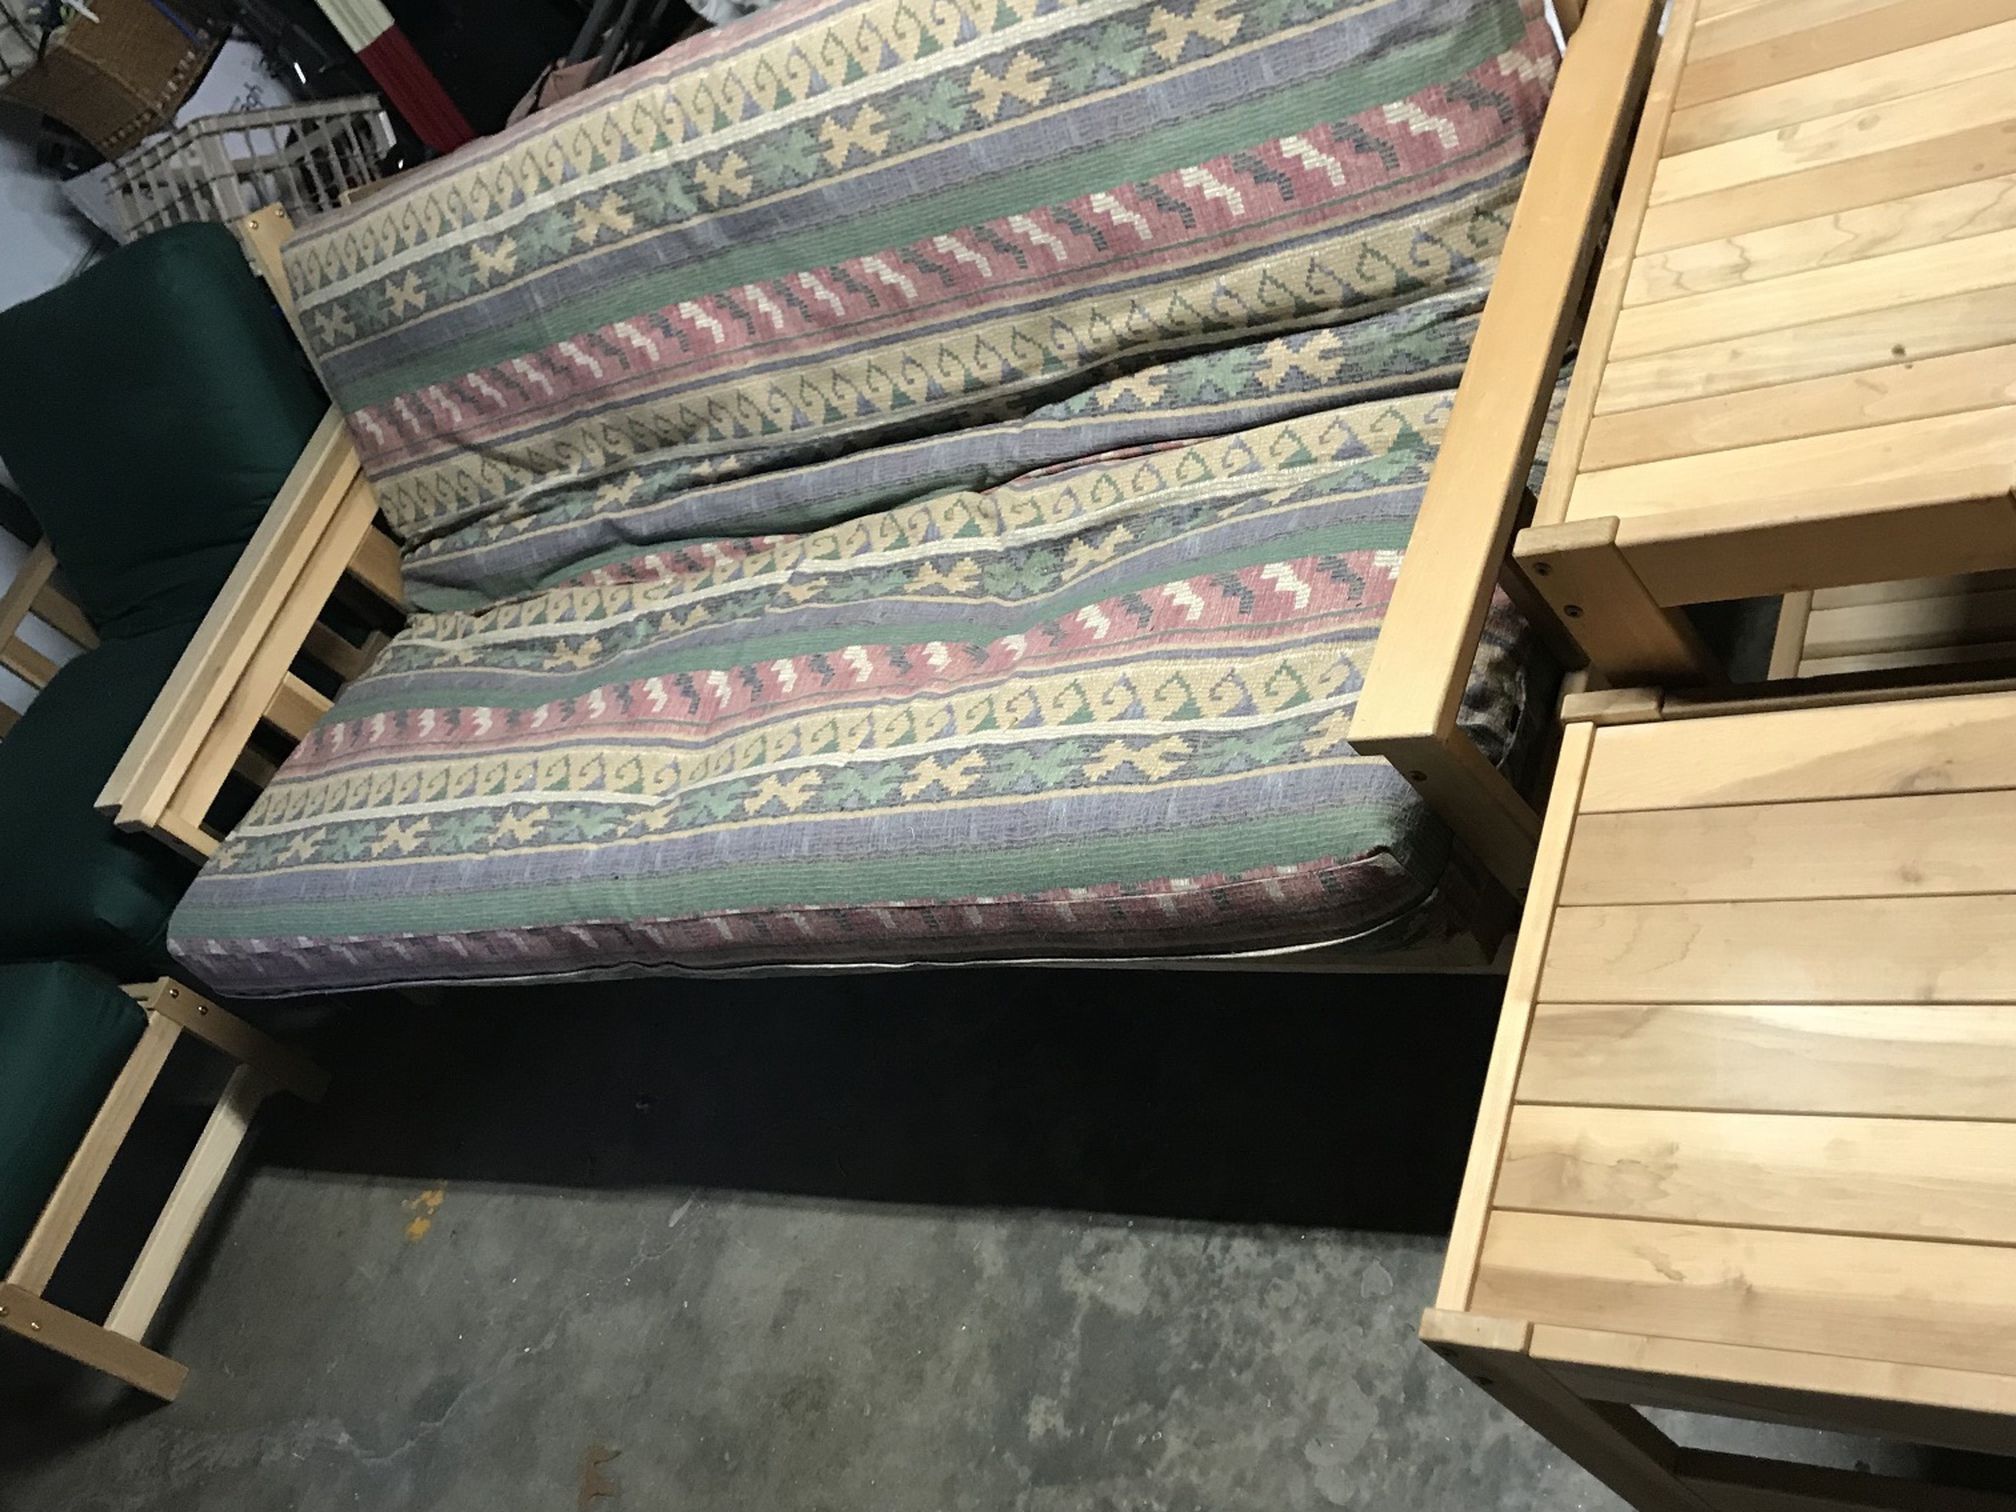 Futon Couch/Bed, Chair w/ Ottoman, & 2 End Tables - individual prices in description - OBO.